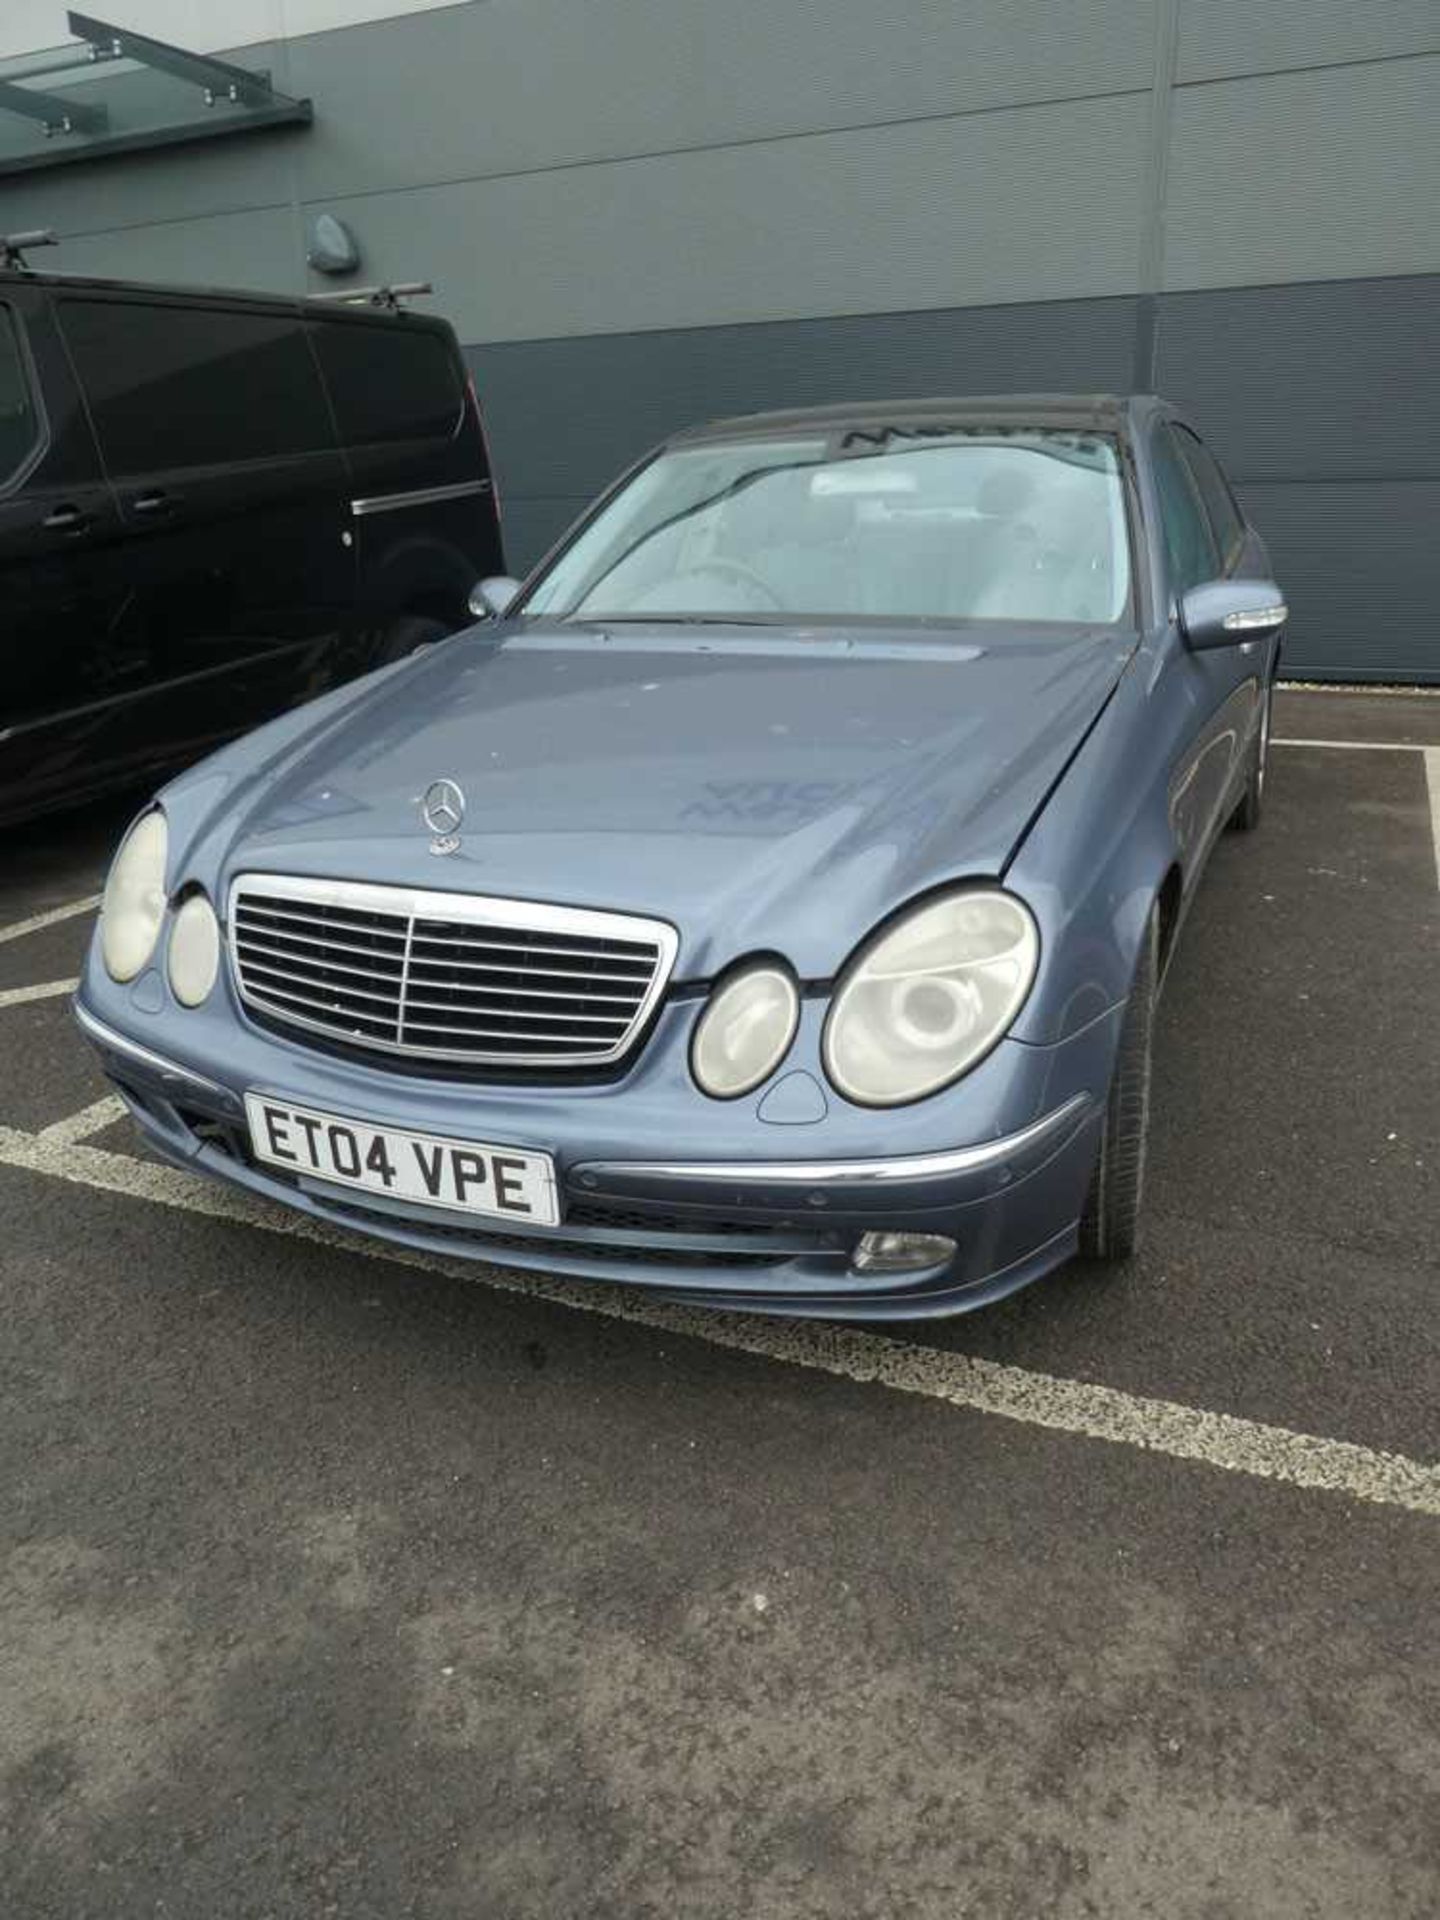 ET04 VPE (2004) Mercedes E240 Avantgarde Auto saloon, in blue, 2597cc, petrol, first registered 12/